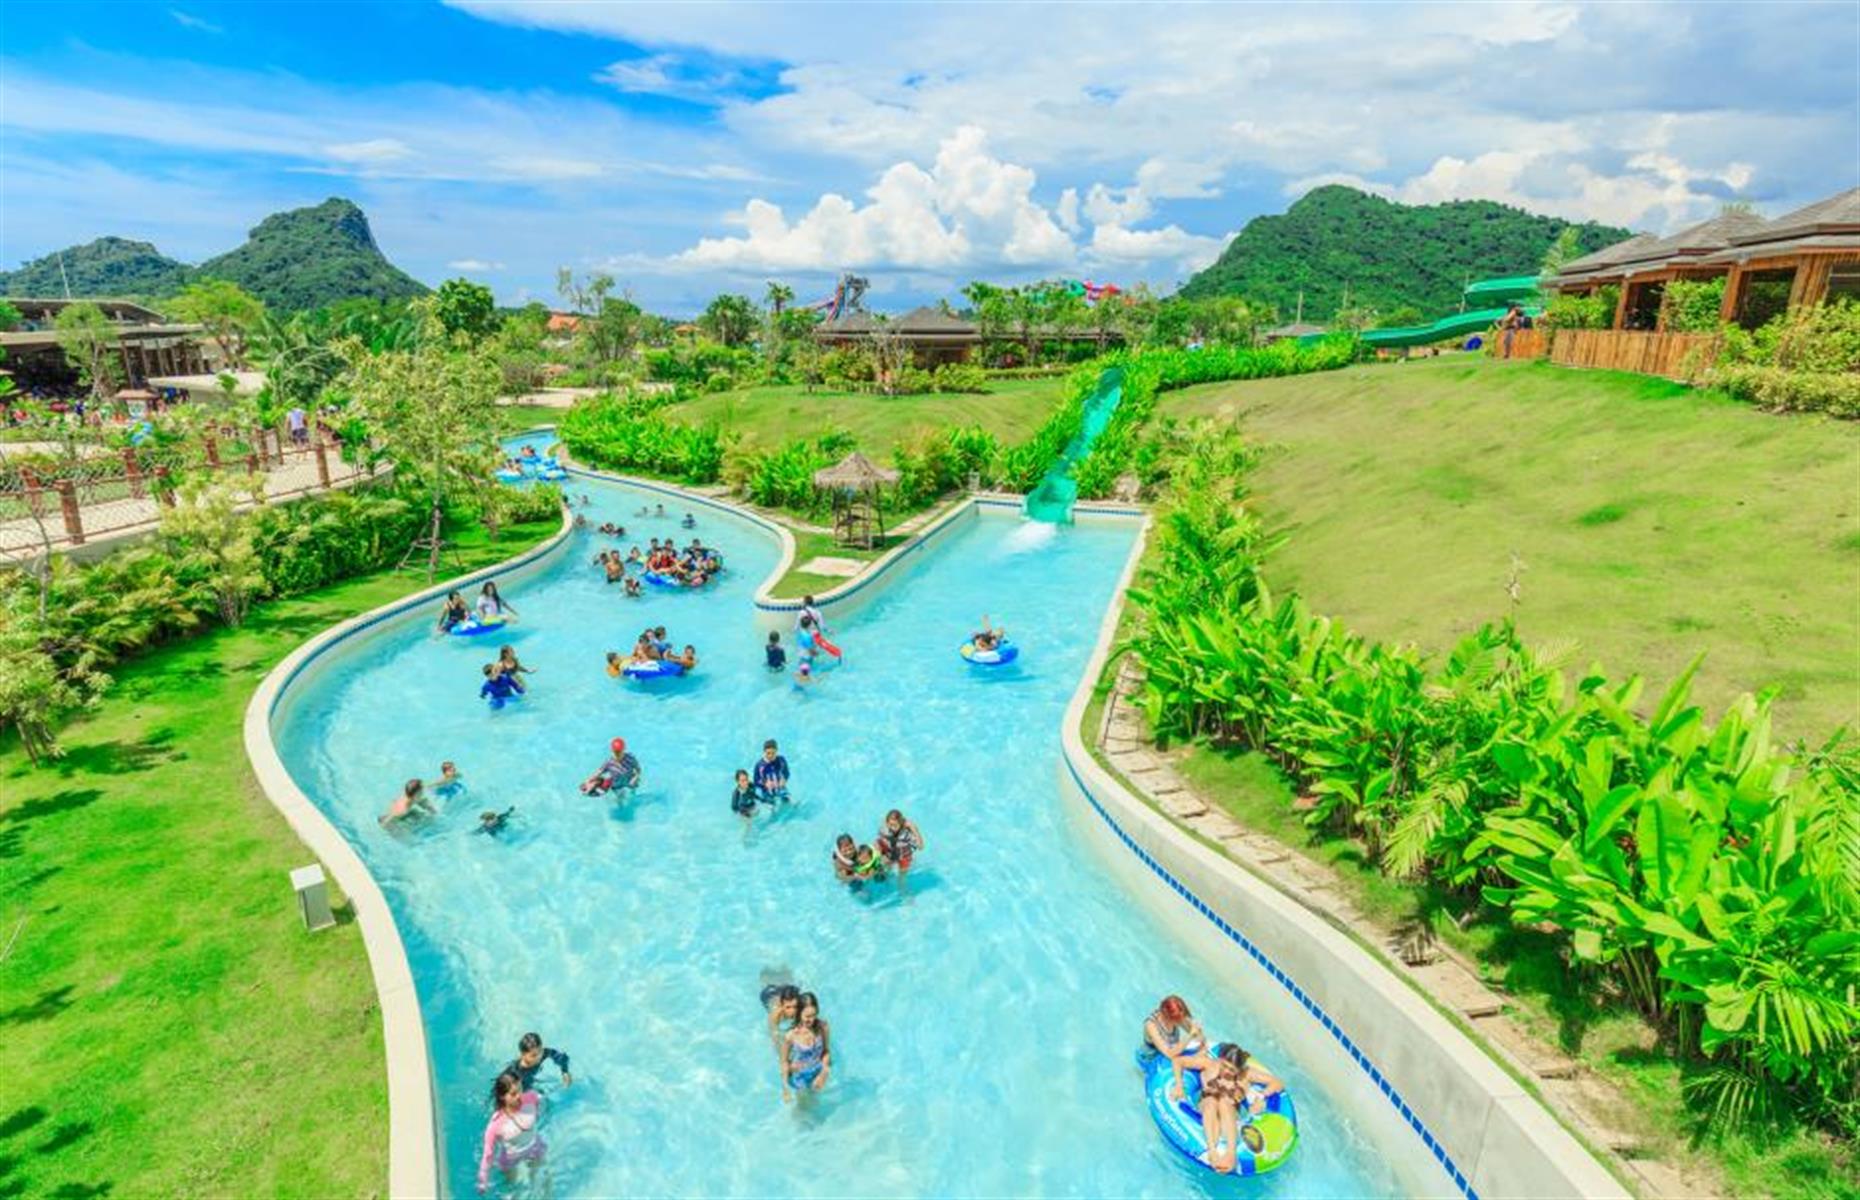 <p>With 21 water rides and pools over an area of almost two million square feet (186,000sqm), <a href="https://www.ramayanawaterpark.com">this attraction just south of Pattaya</a> is big. In fact, it's Thailand's biggest water park. But it's also very beautiful with lovely green spaces and a natural lake. The double wave pool guarantees plenty of squeals as do the AquaLoop and FreeFall – the park's most extreme rides. Small children are also well catered for with play areas and the tranquil lazy river.</p>